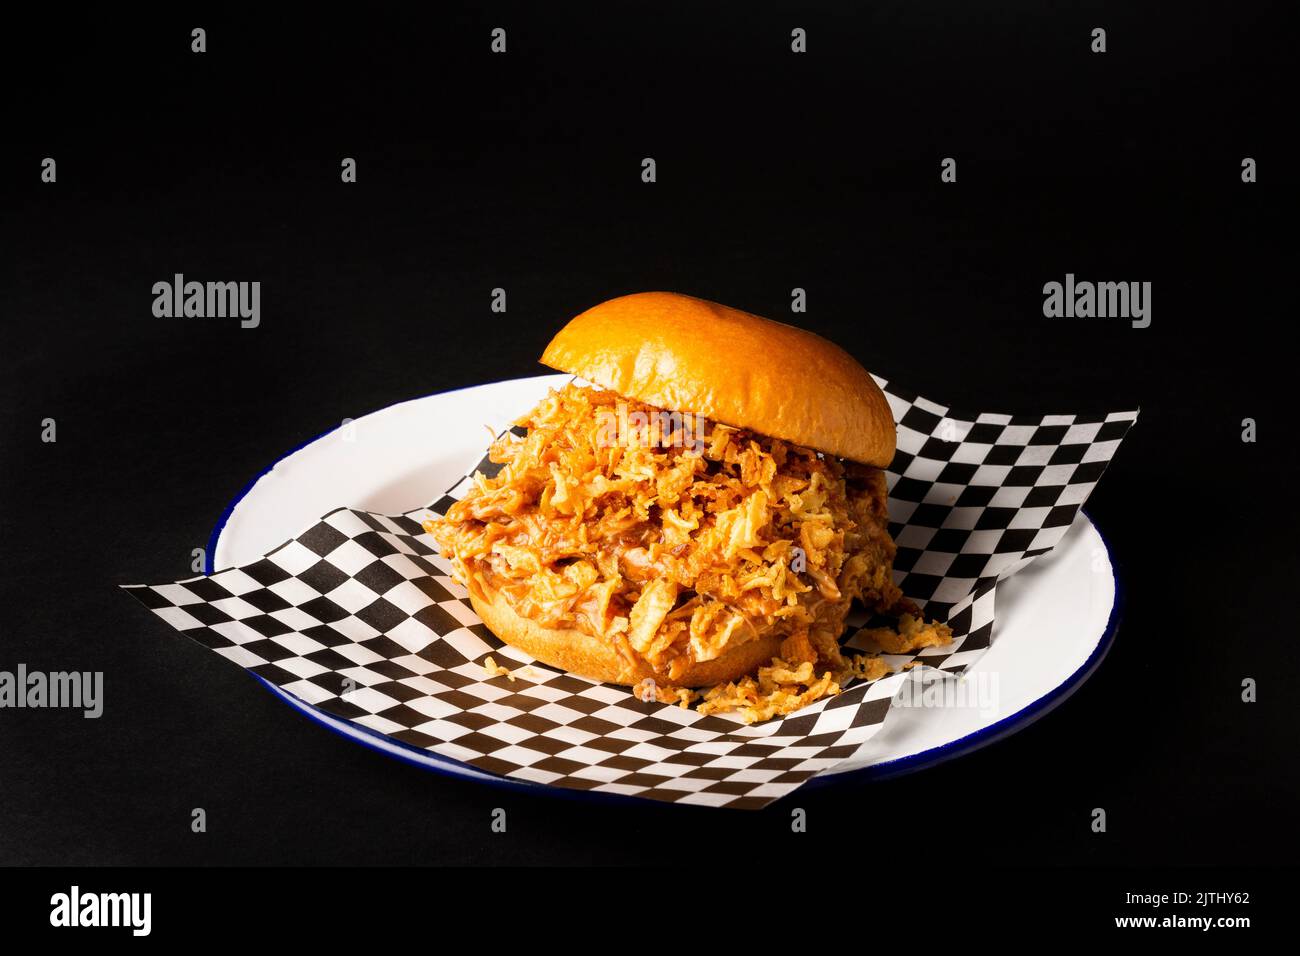 Pulled chicken burger over a black background Stock Photo